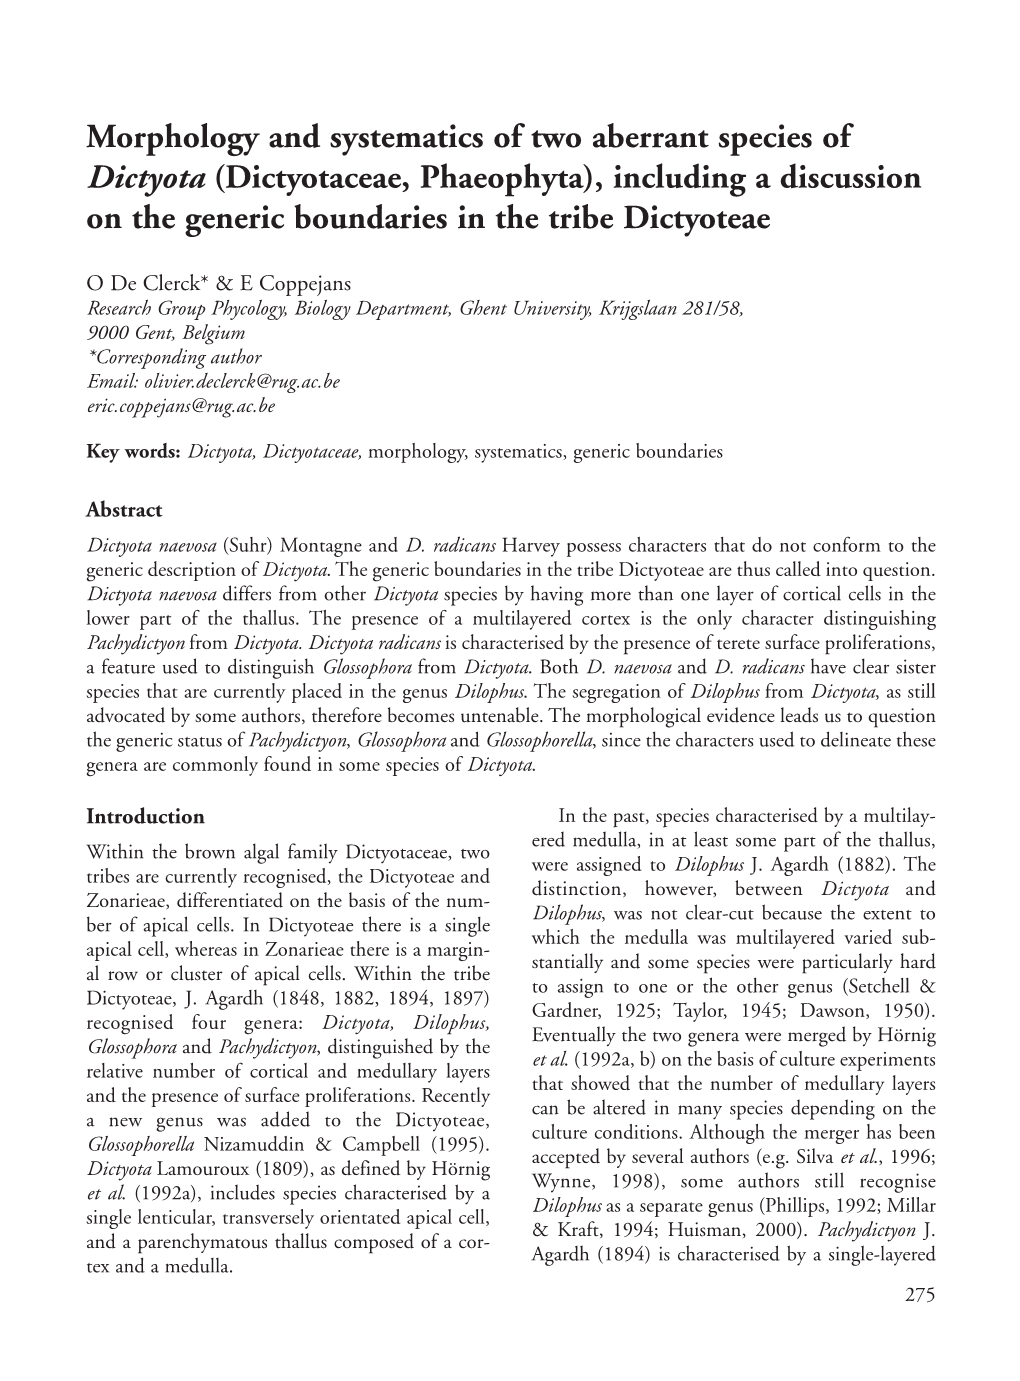 Morphology and Systematics of Two Aberrant Species of Dictyota (Dictyotaceae, Phaeophyta), Including a Discussion on the Generic Boundaries in the Tribe Dictyoteae